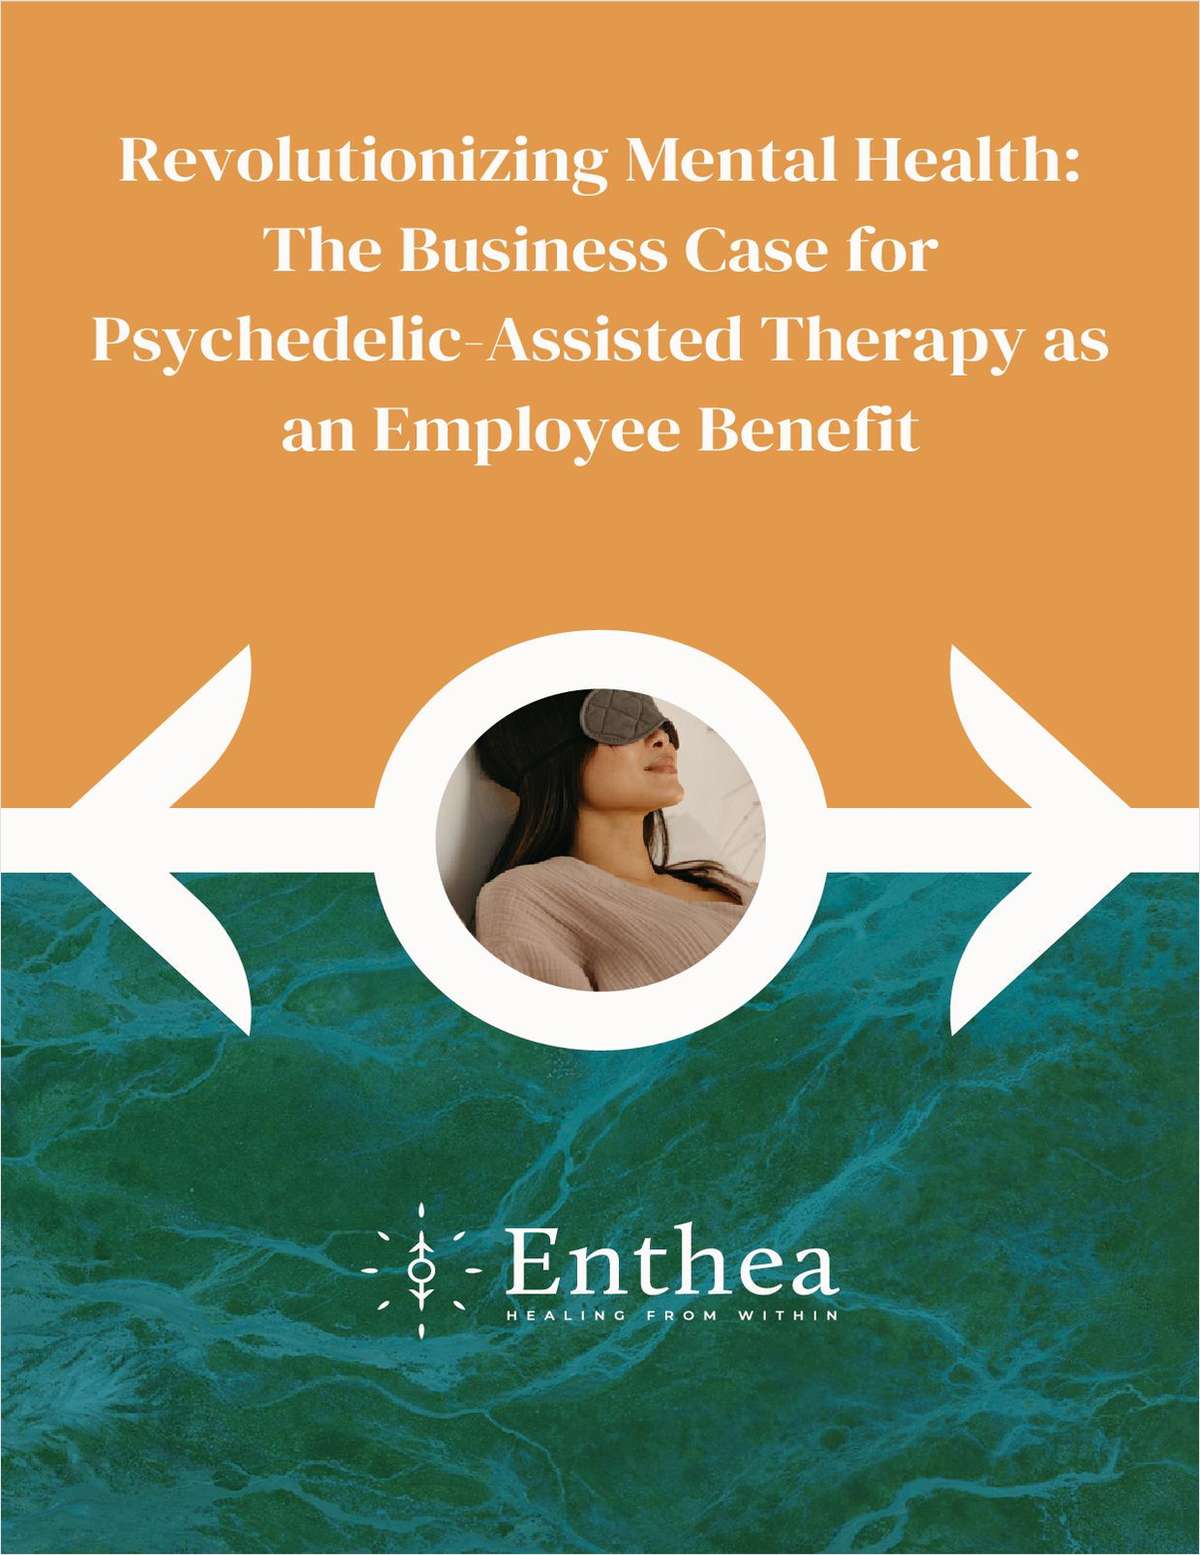 Revolutionizing Mental Health: The Business Case for Psychedelic-Assisted Therapy as an Employee Benefit link